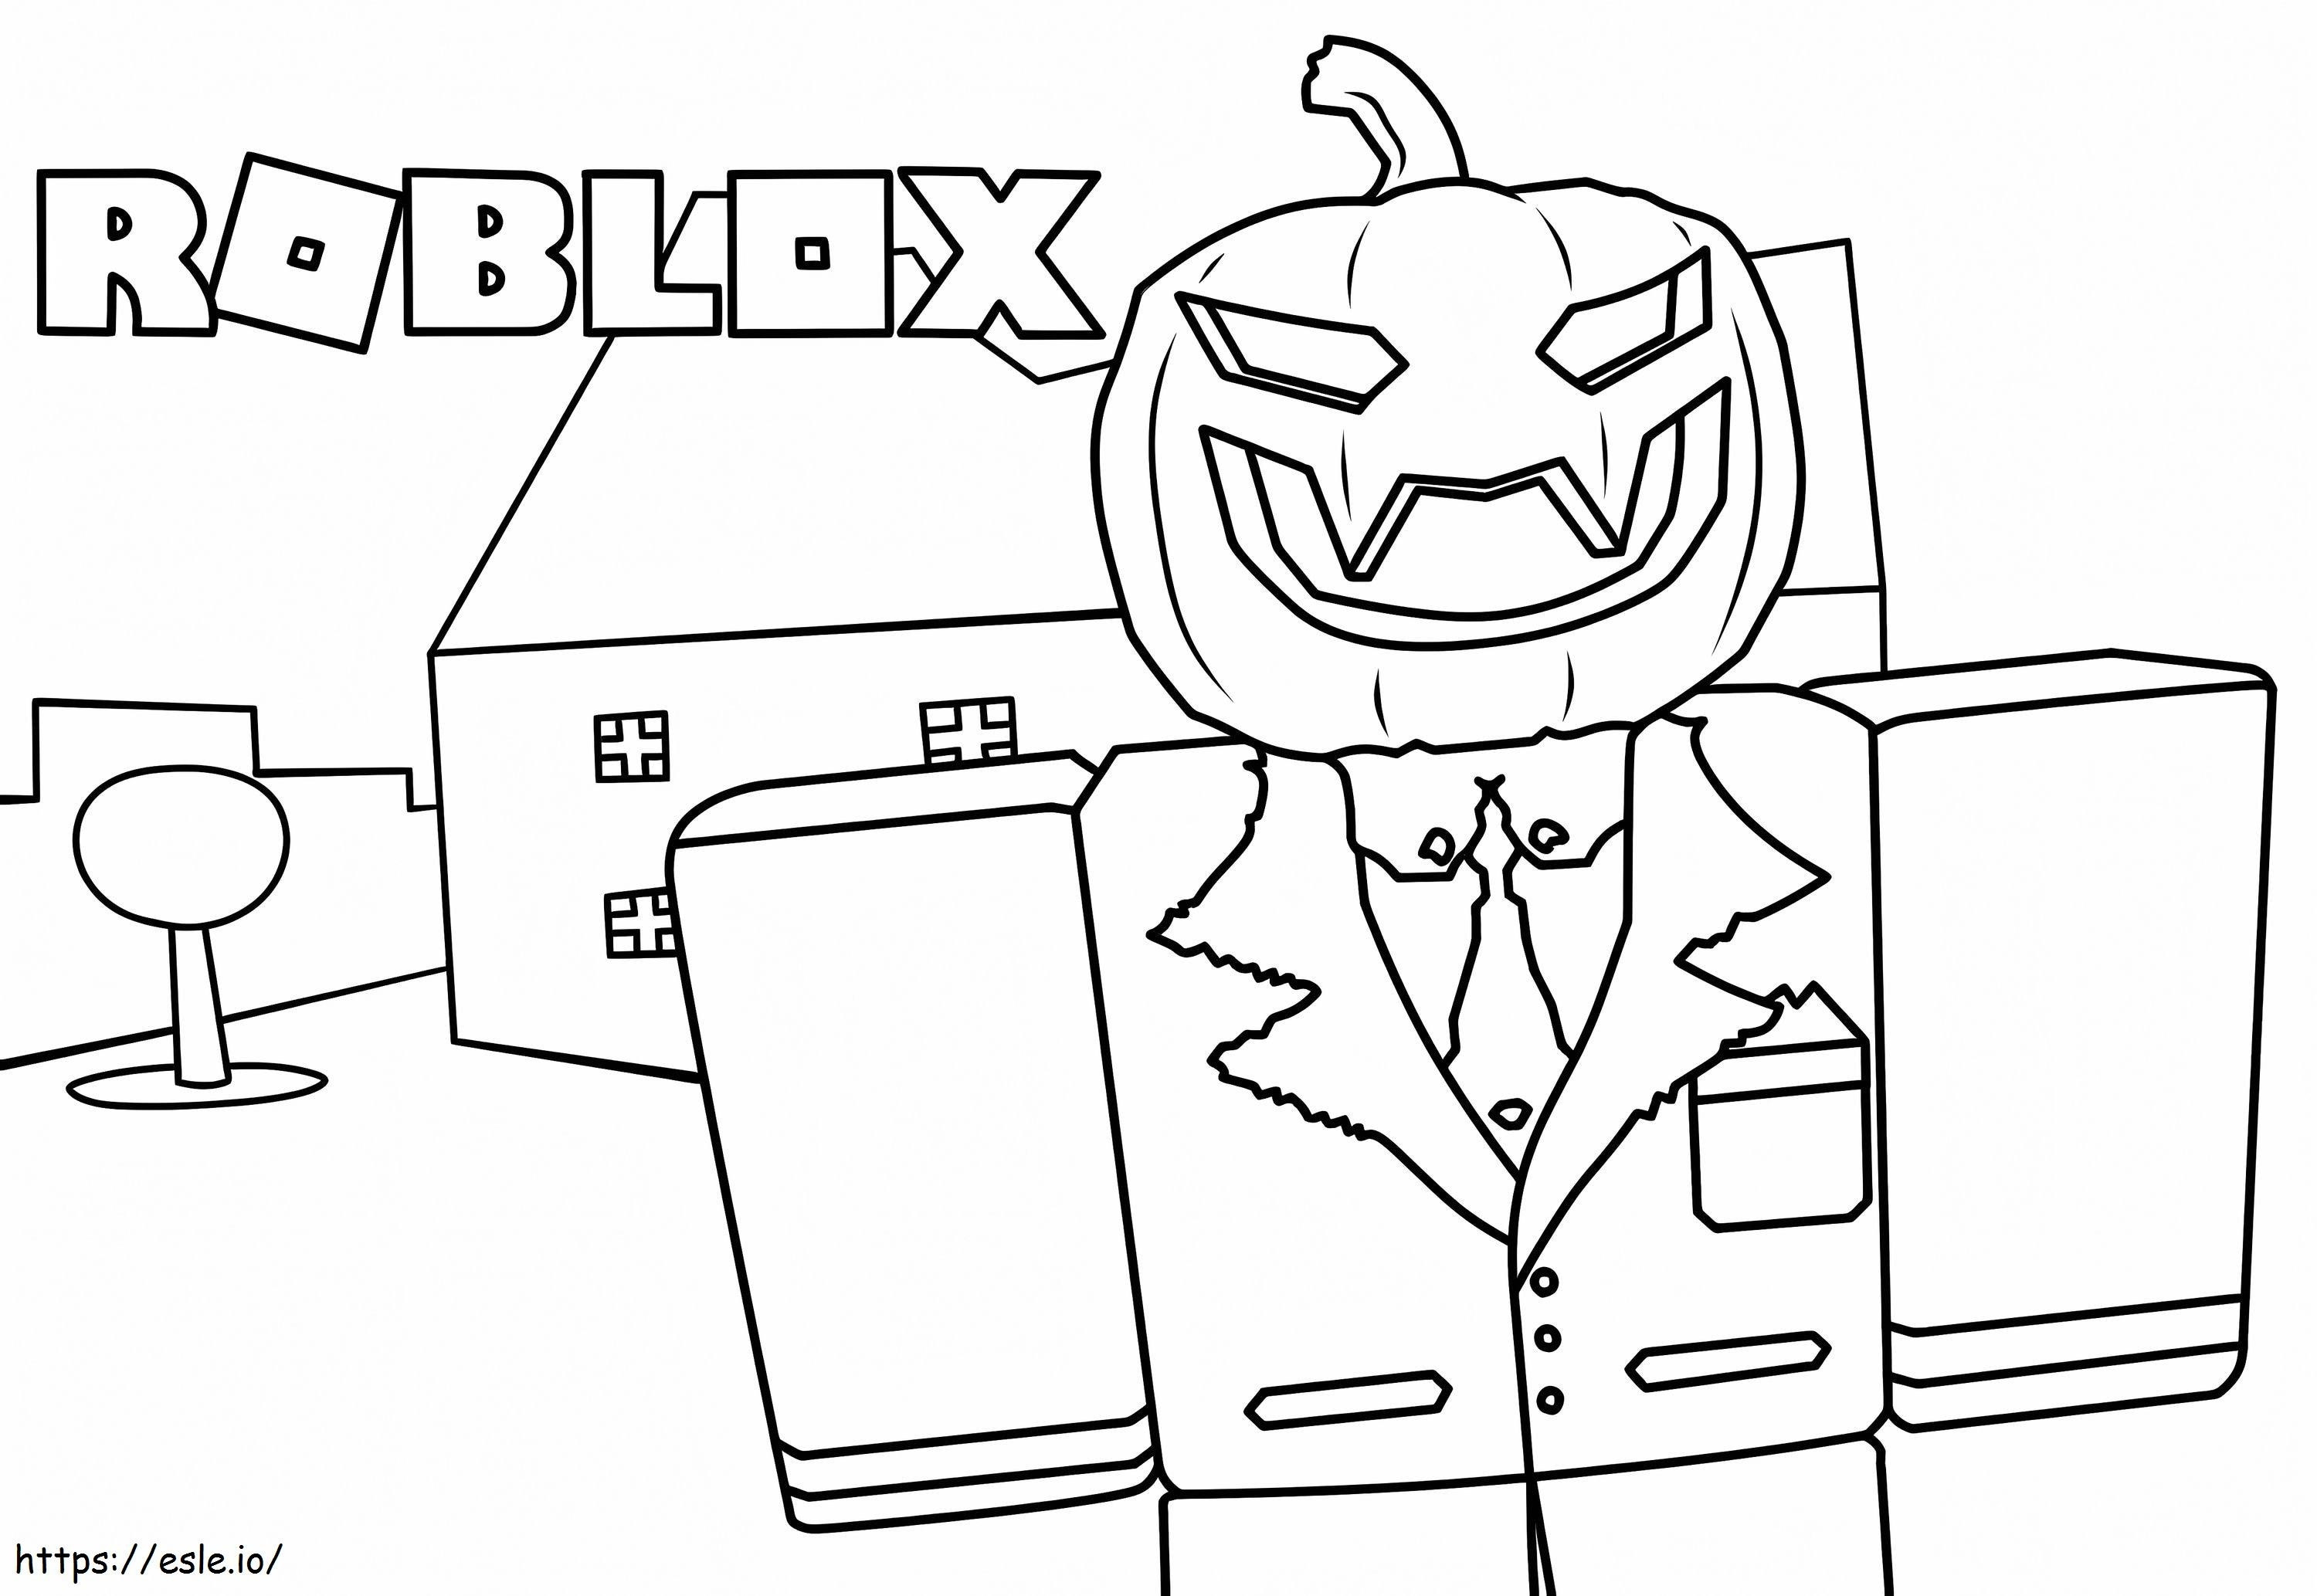 Roblox The Halloween coloring page